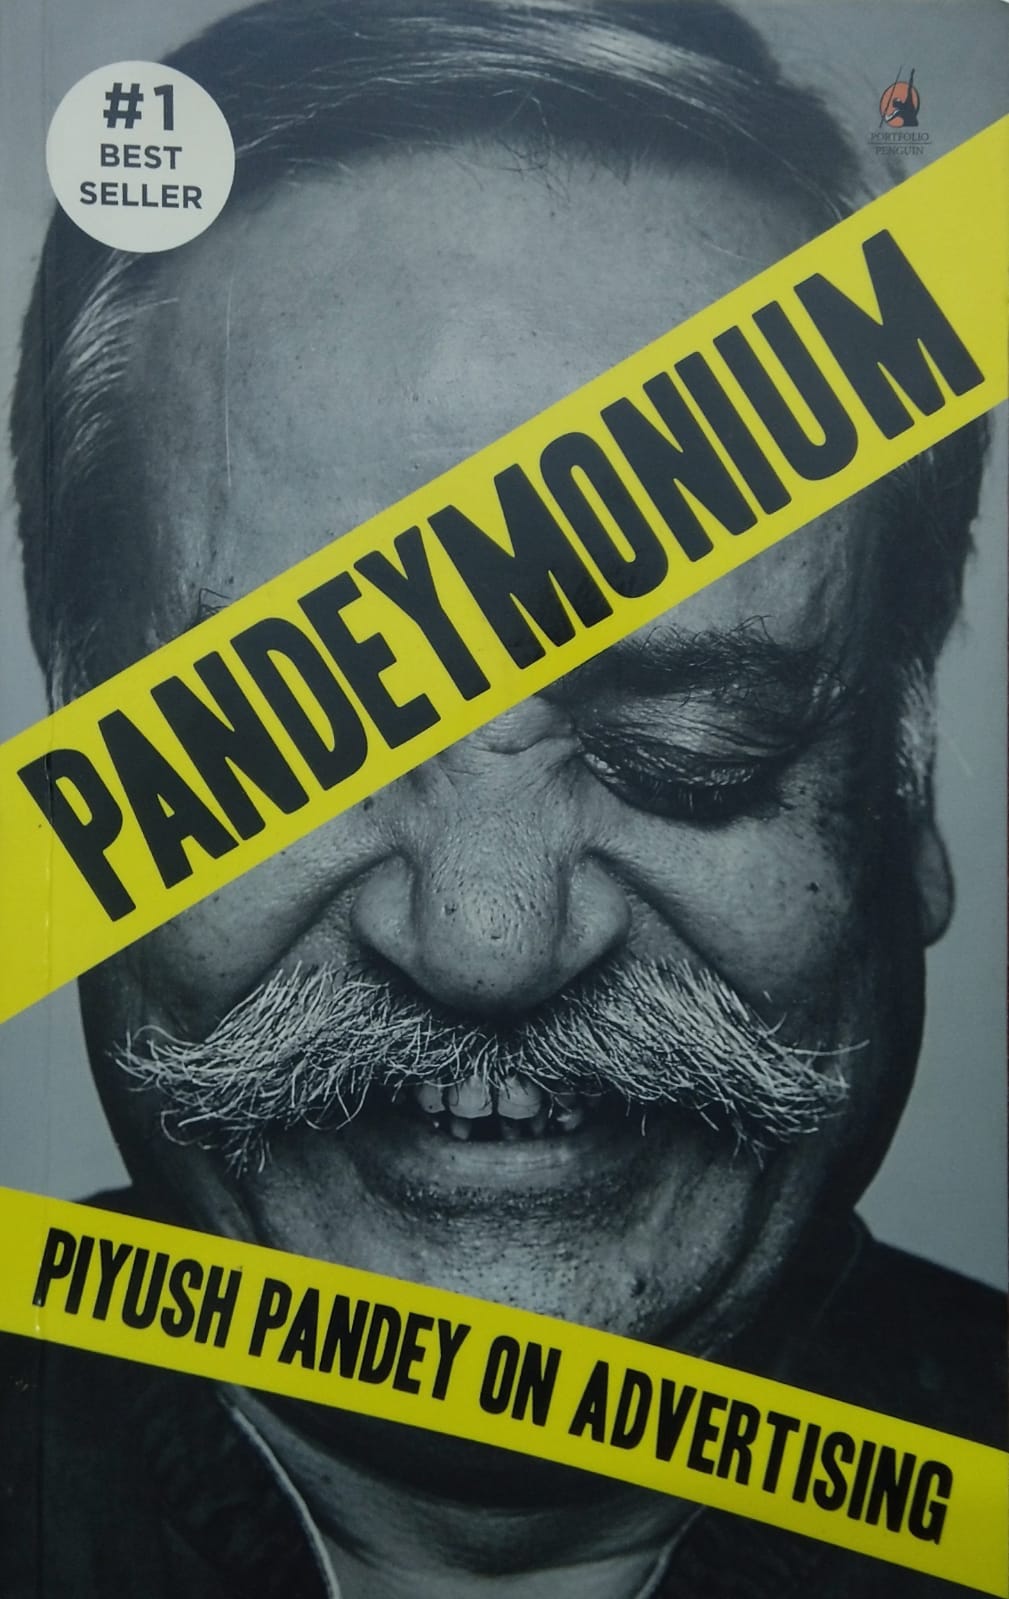 Pandeymonium: Piyush Pandey on Advertising (Cover of Book - Piyush's face with the title written on top in two strips)